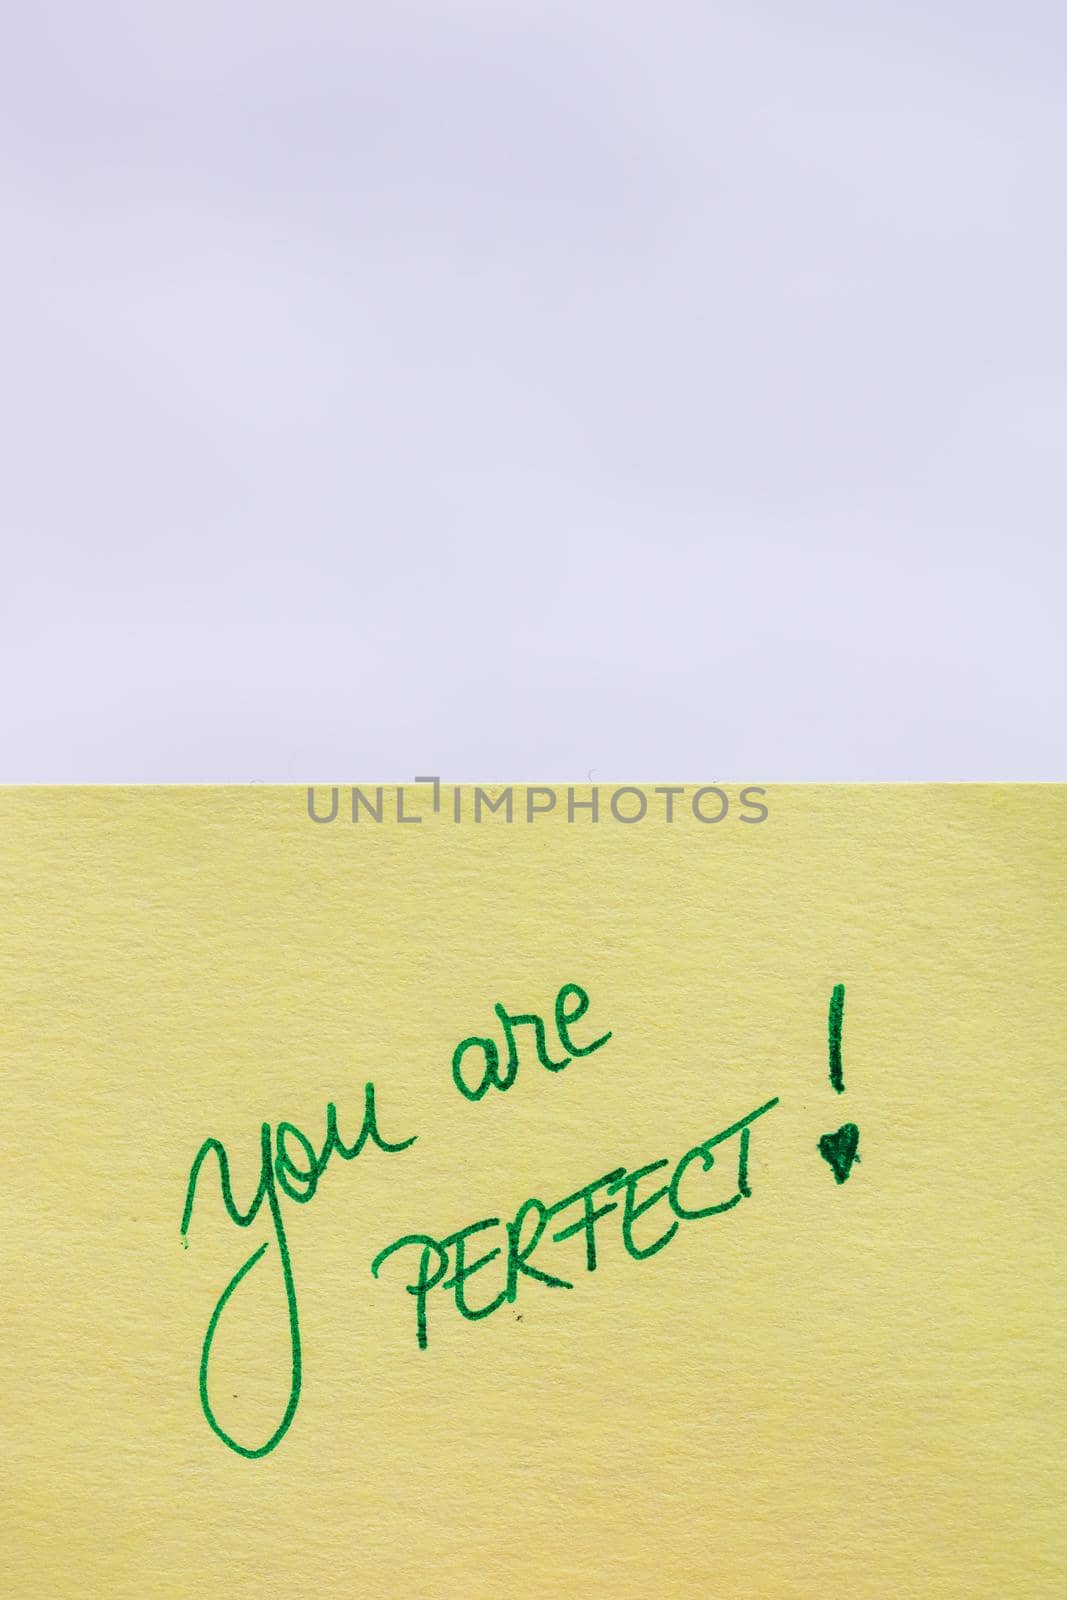 You are perfect handwriting text close up isolated on yellow paper with copy space.